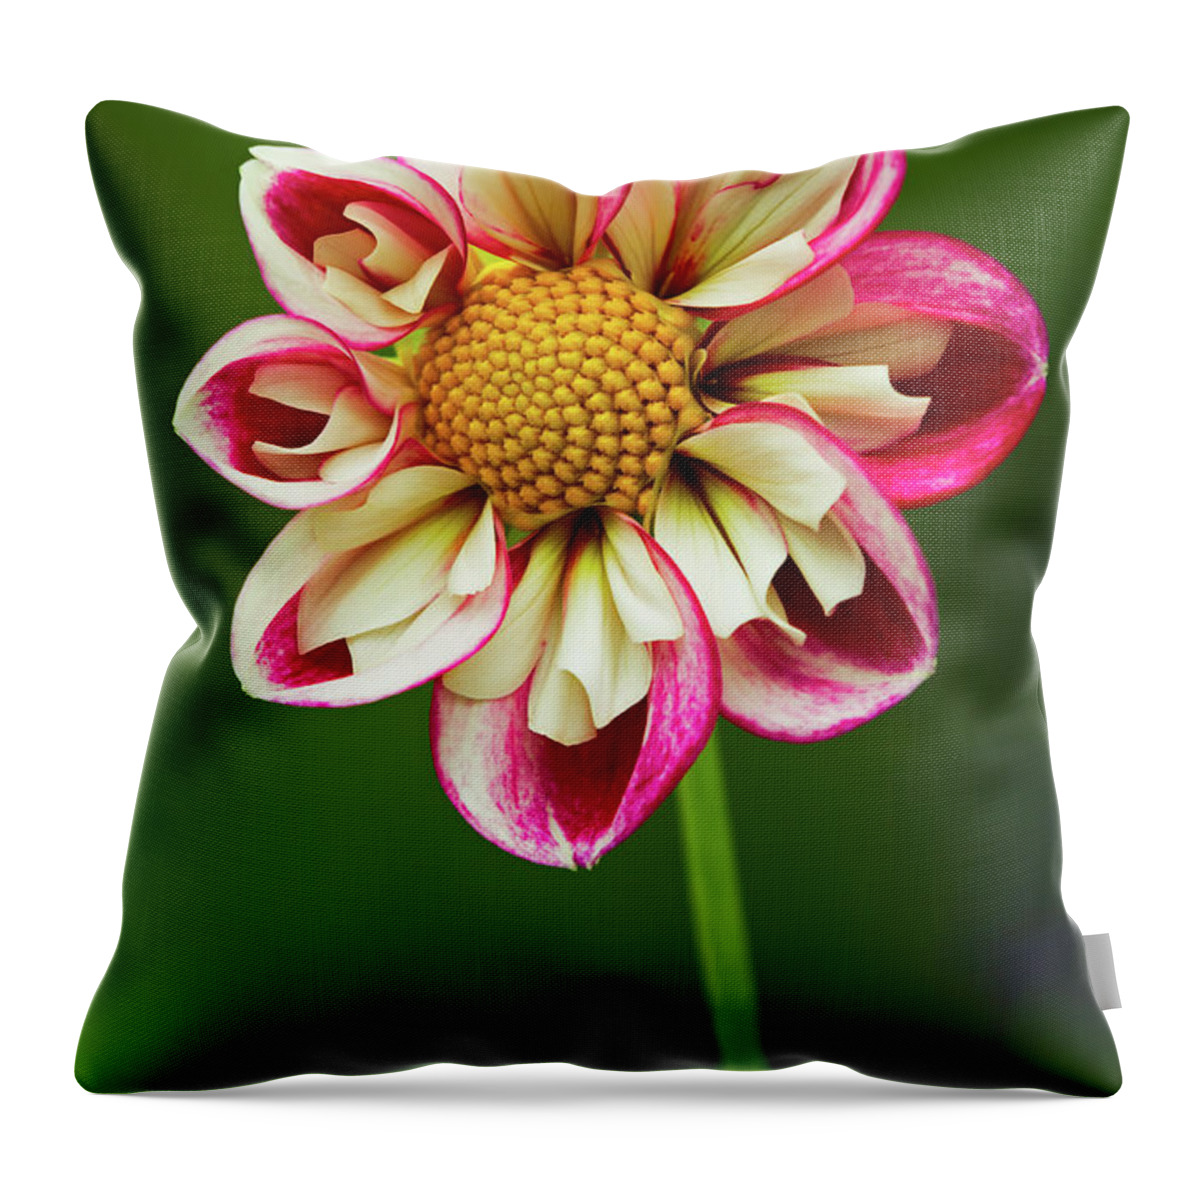 Dahlia Throw Pillow featuring the photograph Come Dance With Me by Juergen Roth